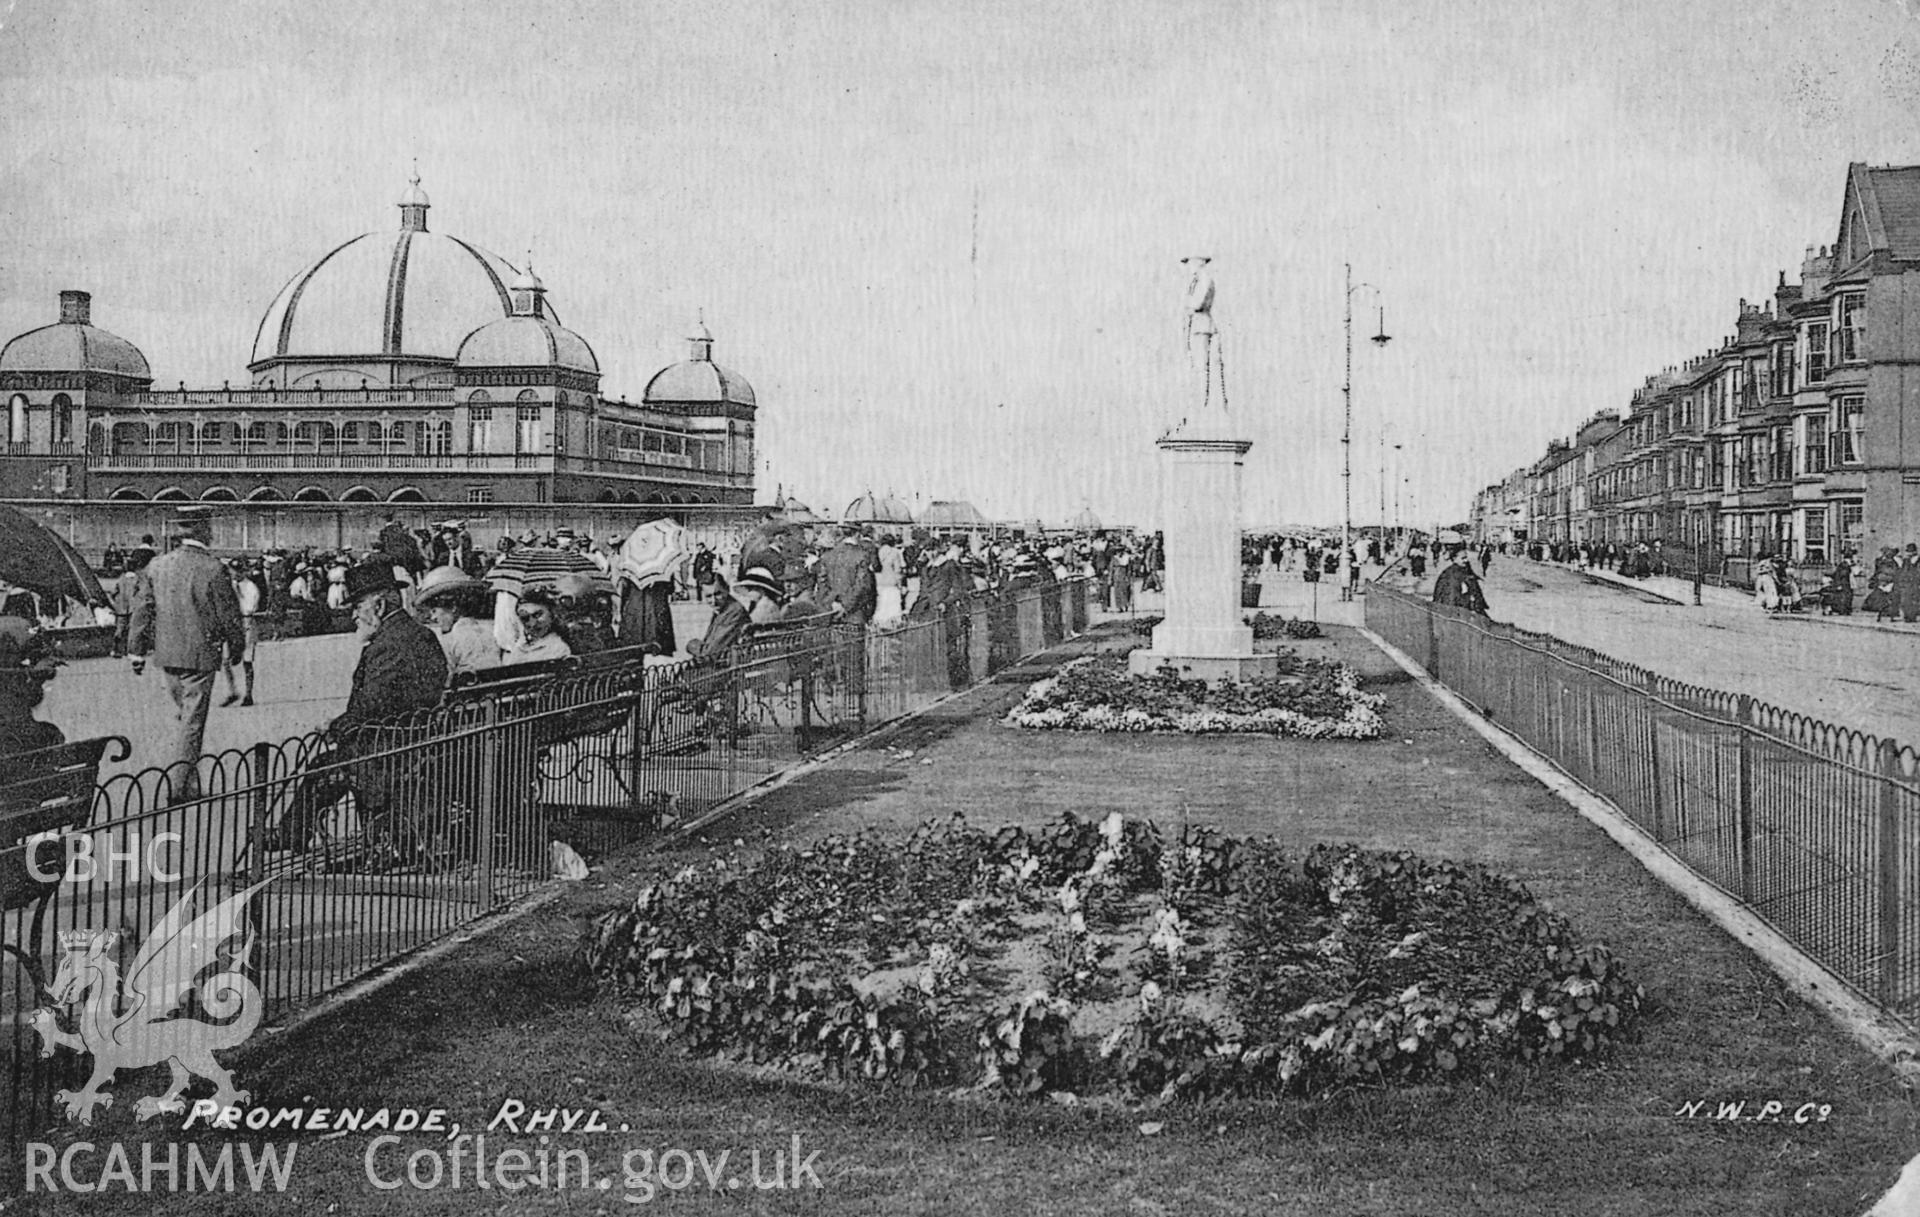 Postcard view of the promenade at Rhyl.